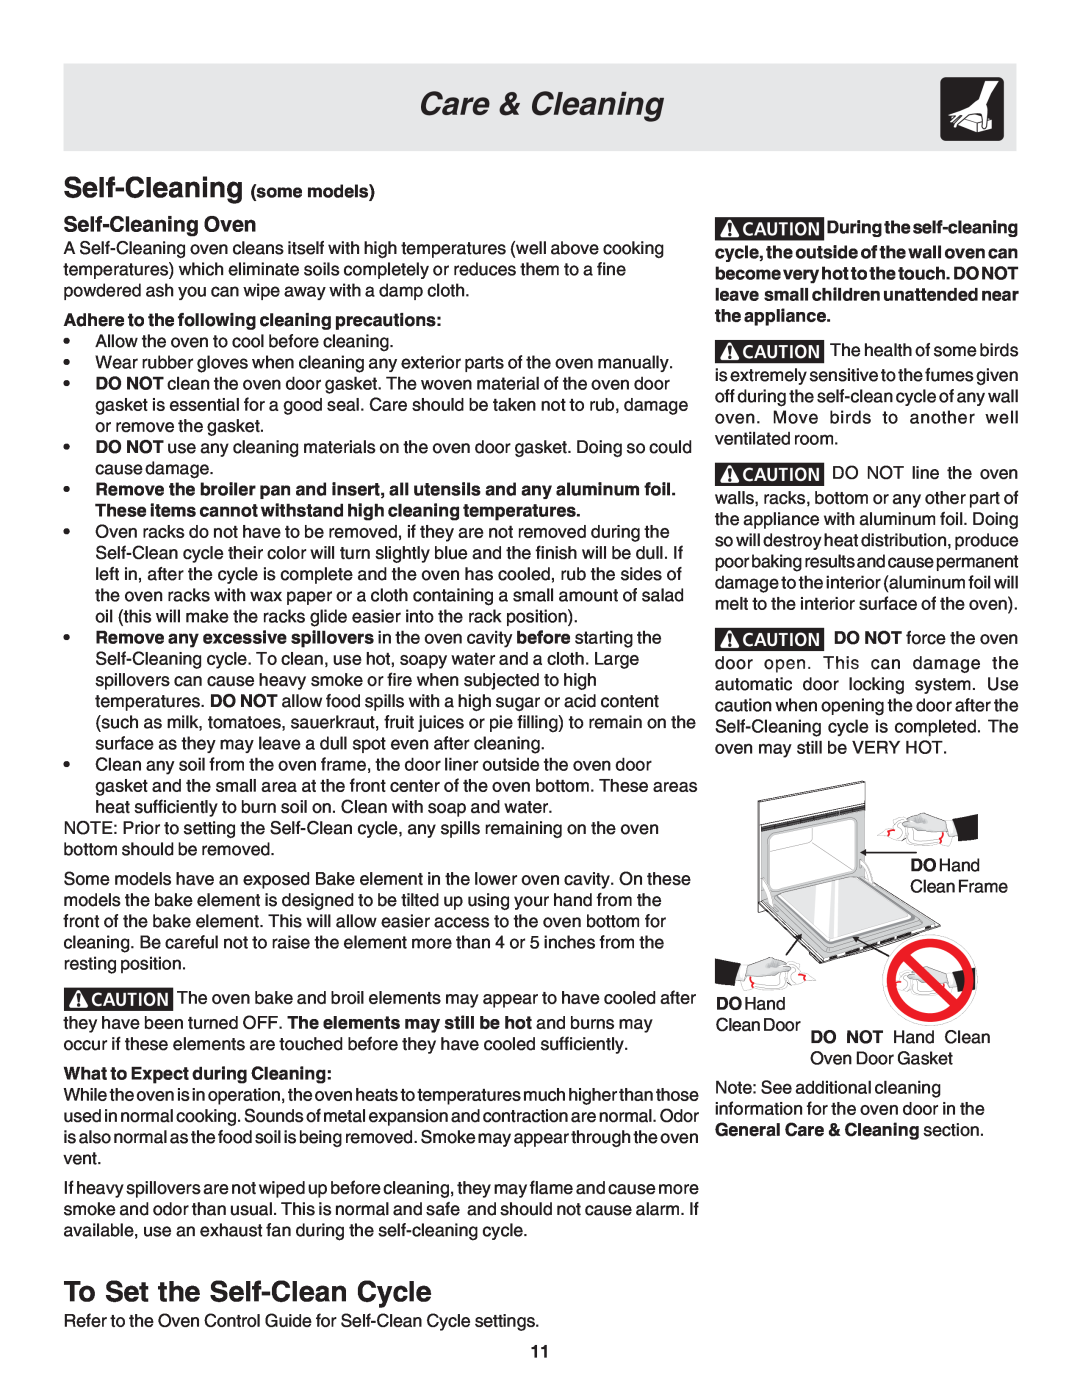 Frigidaire 318200943 warranty Self-Cleaning some models, To Set the Self-CleanCycle, Self-CleaningOven, Care & Cleaning 